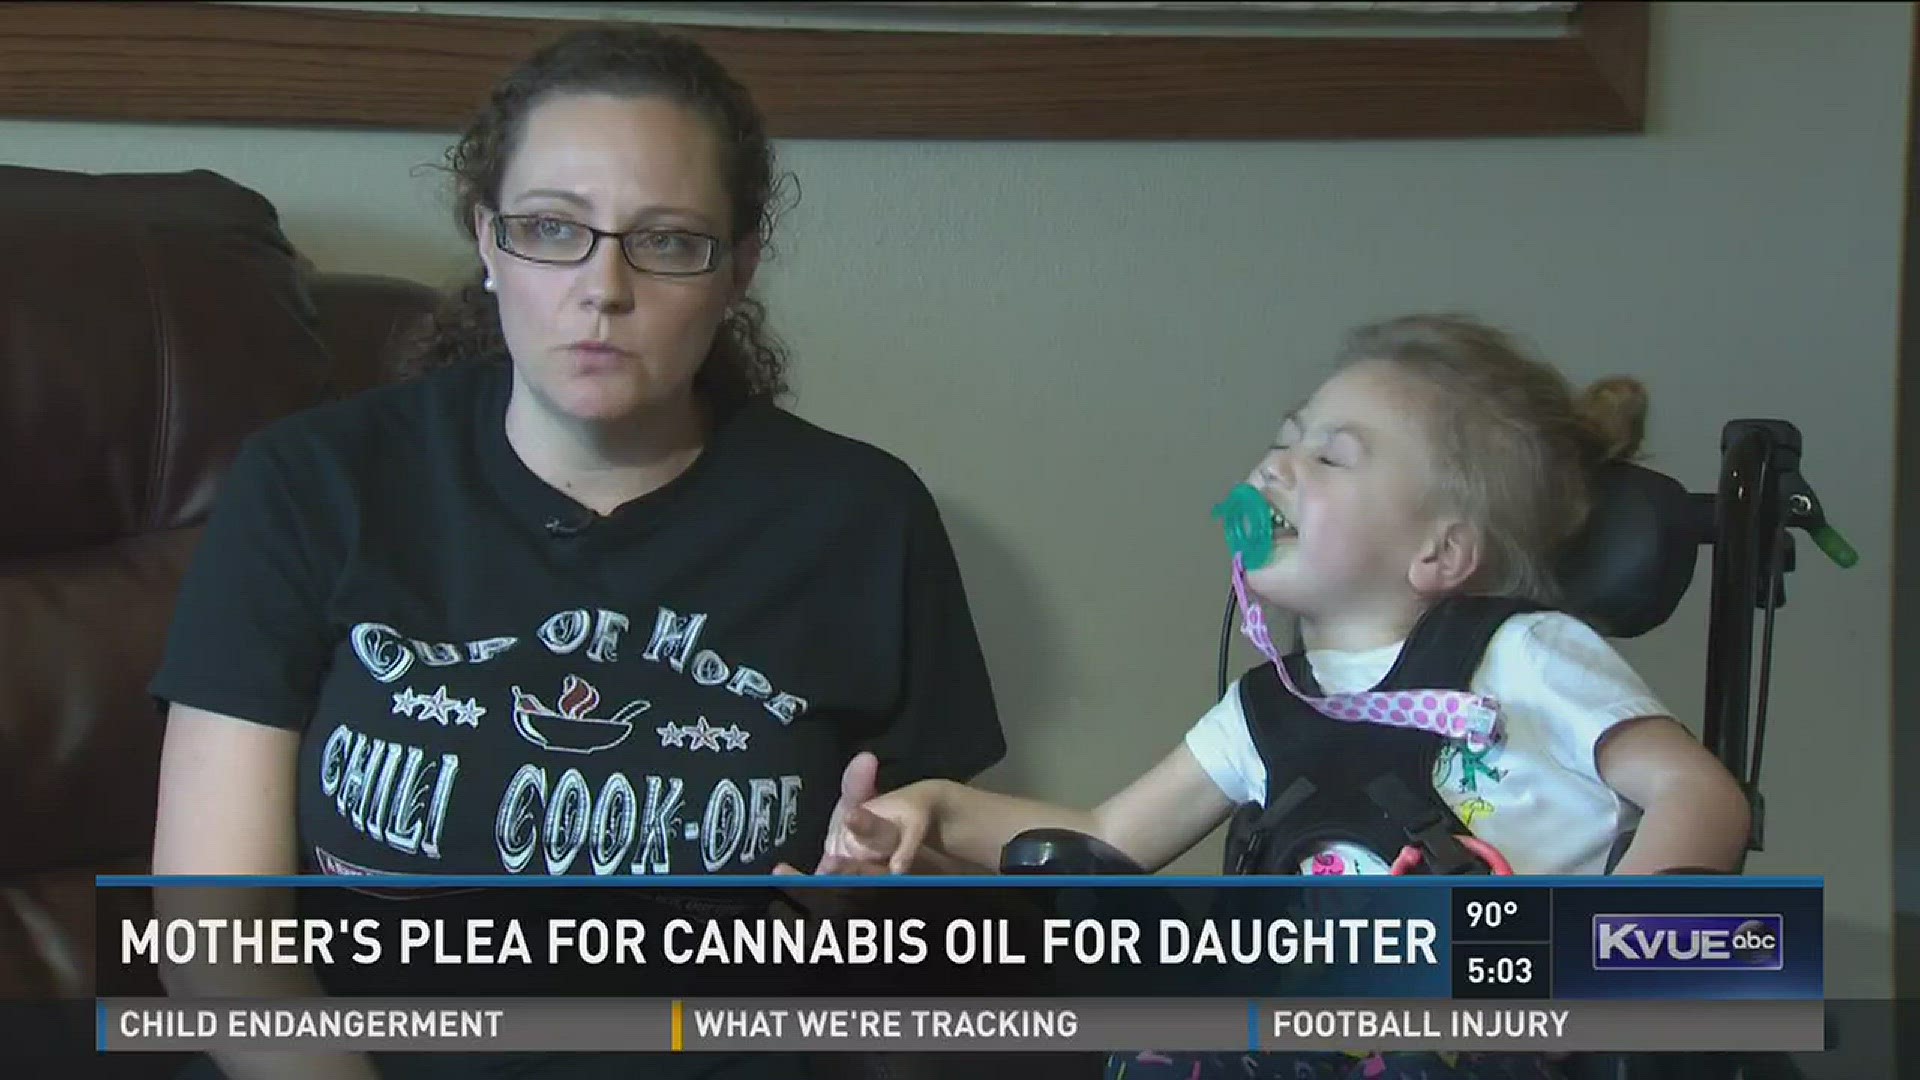 Mother's plea for cannabis oil for daughter